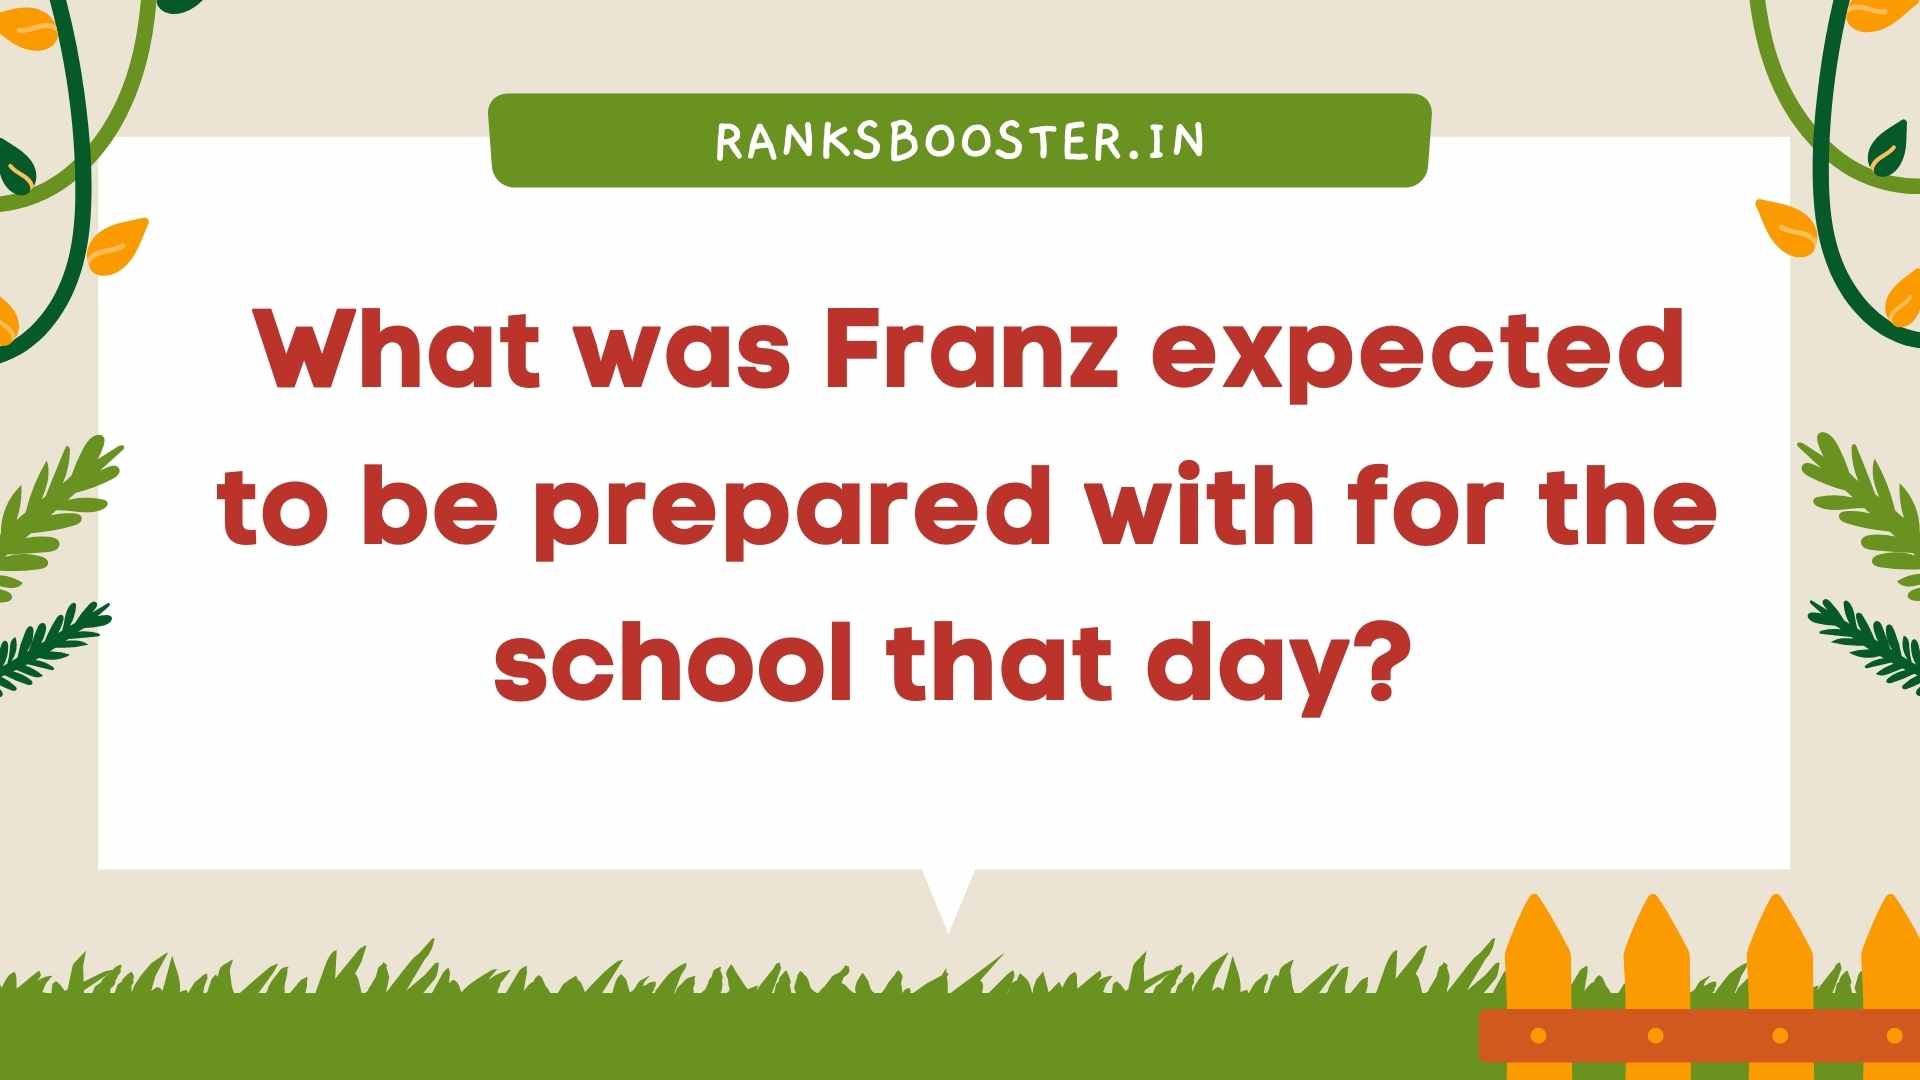 What was Franz expected to be prepared with for the school that day?